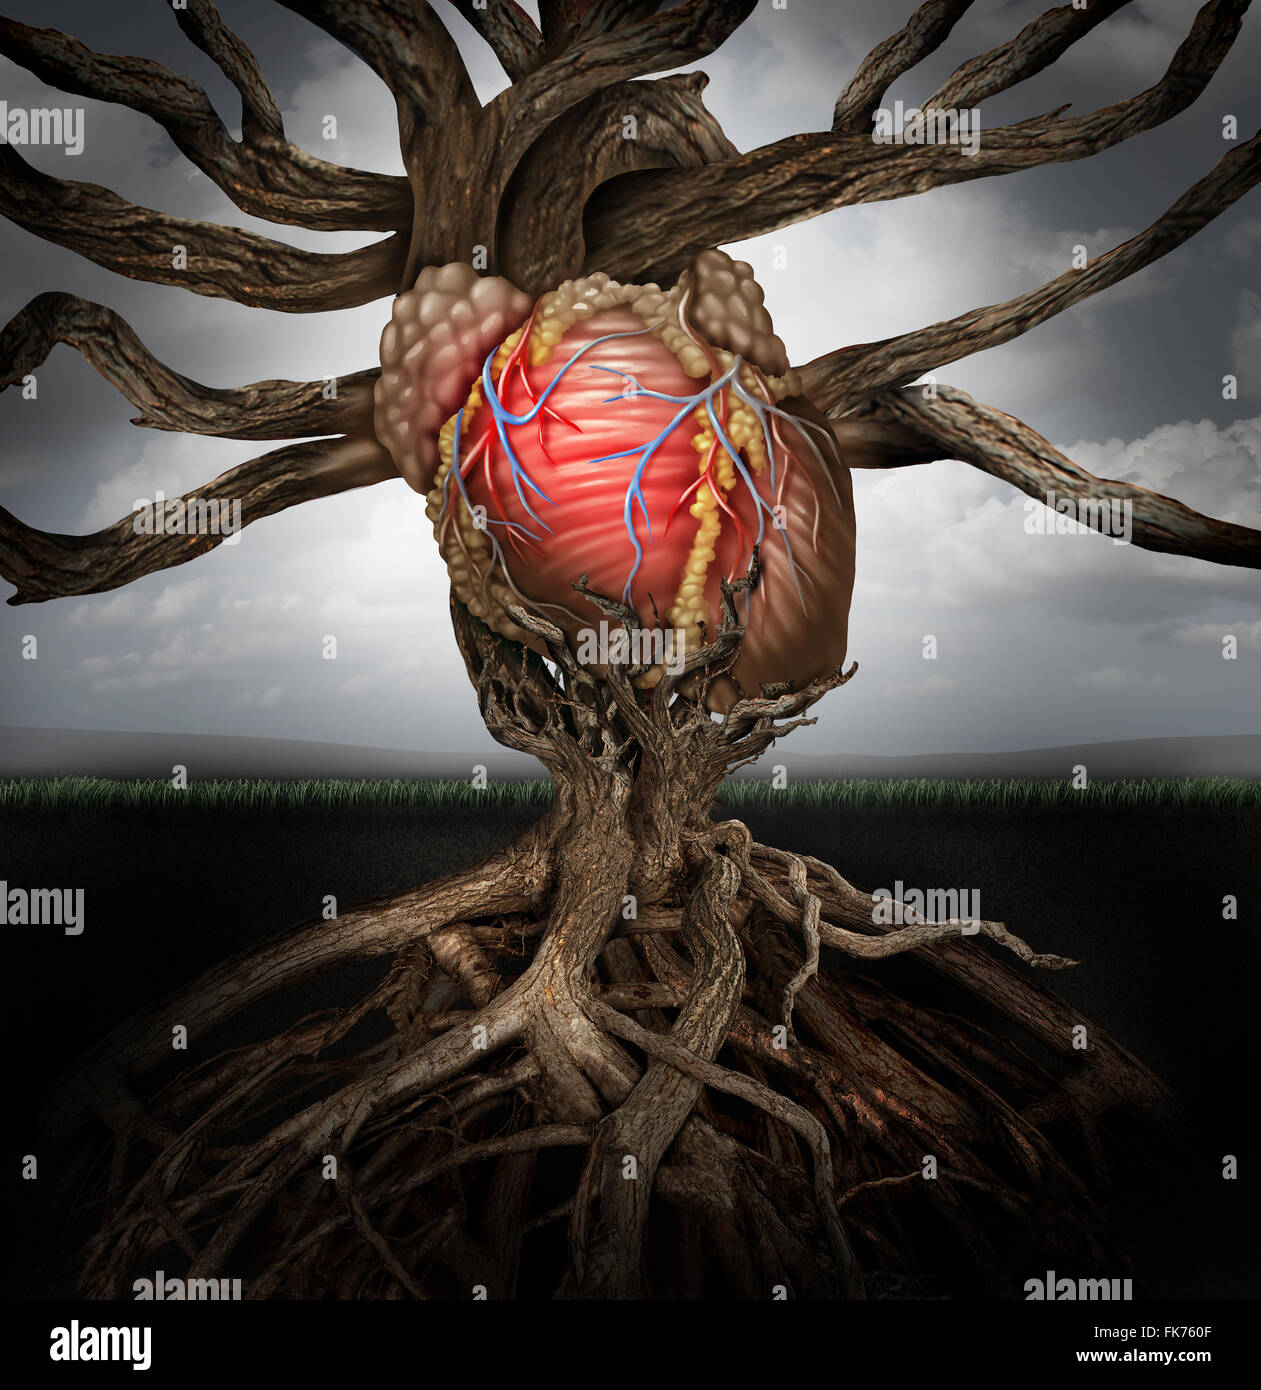 Human heart health concept as a symbol for growing a body organ and the veins and arteries of the circulatory system as a body part shaped as tree roots and branches connected together as a medical metaphor for living life. Stock Photo